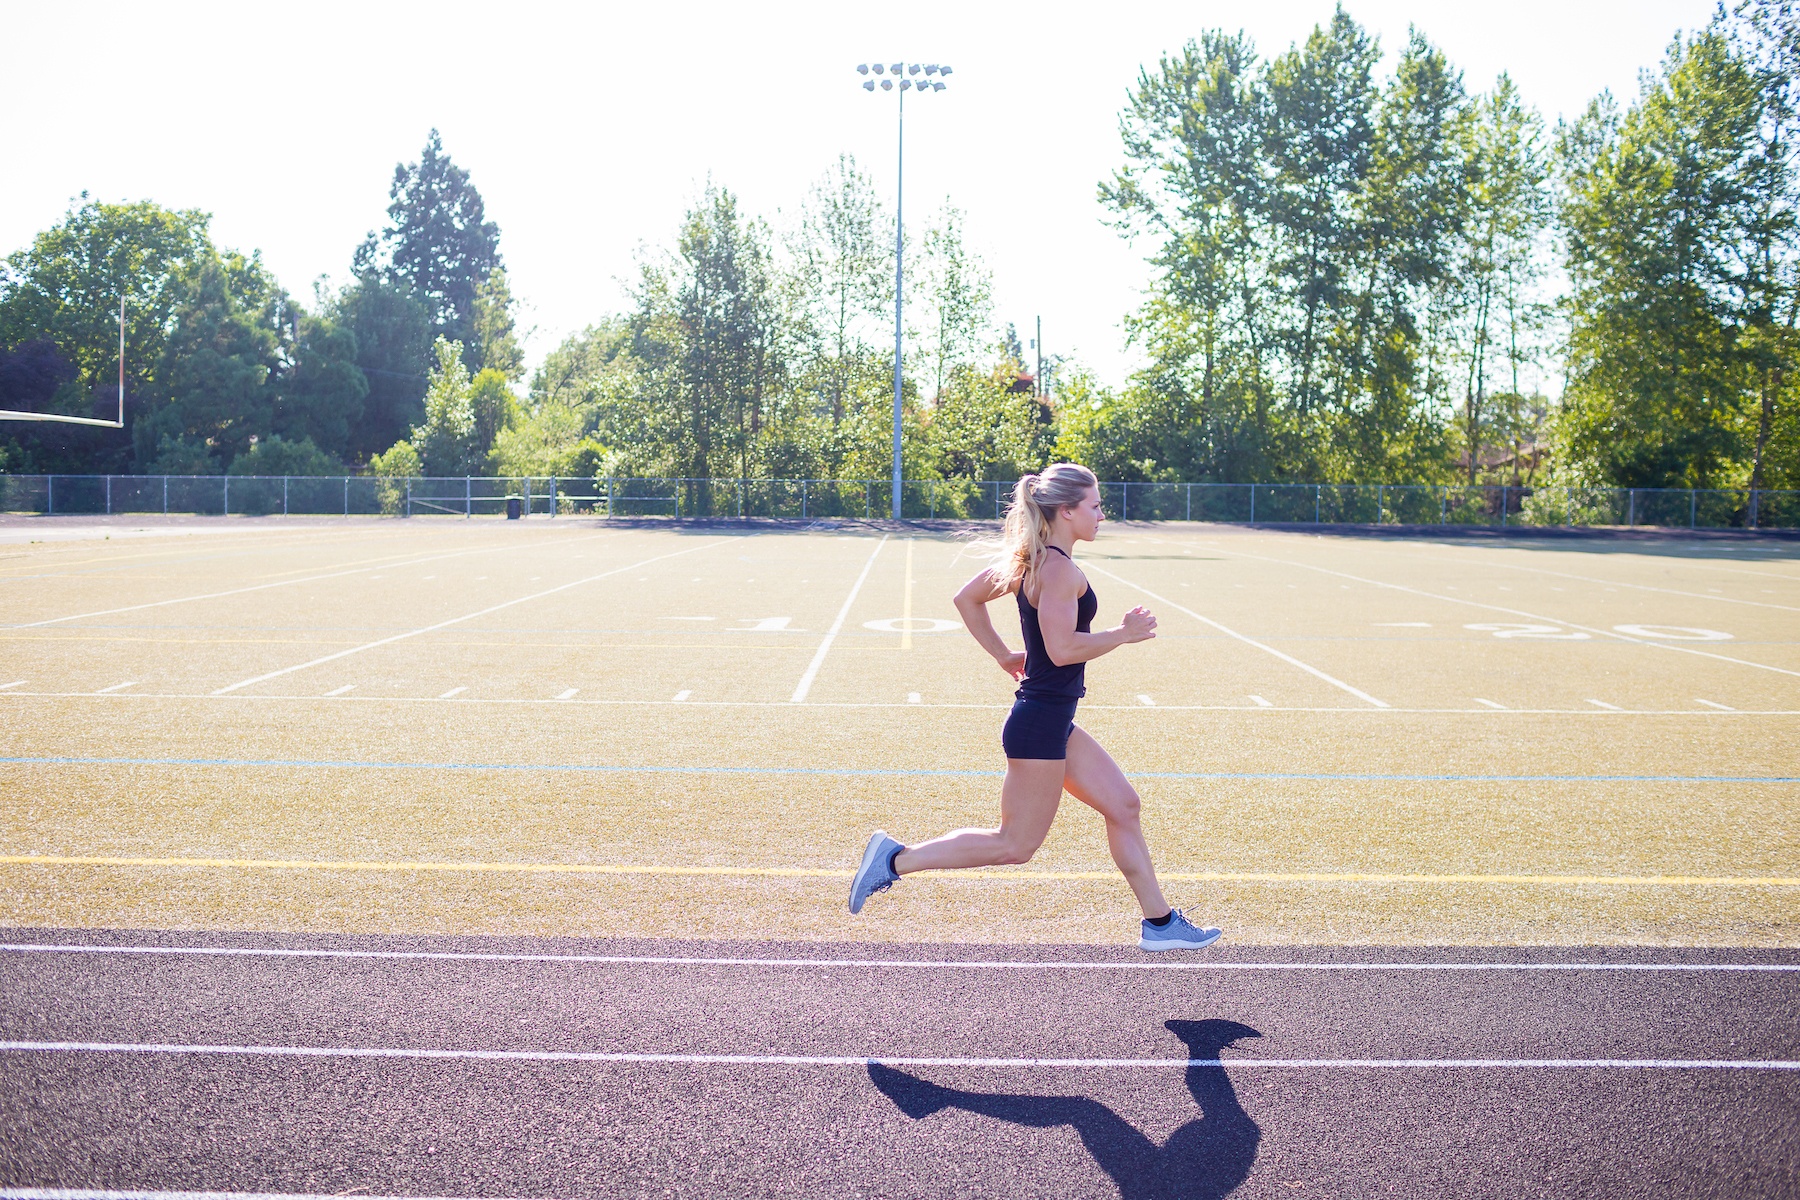 Female runner performs short sprints while working out on an outdoor track in the summer.